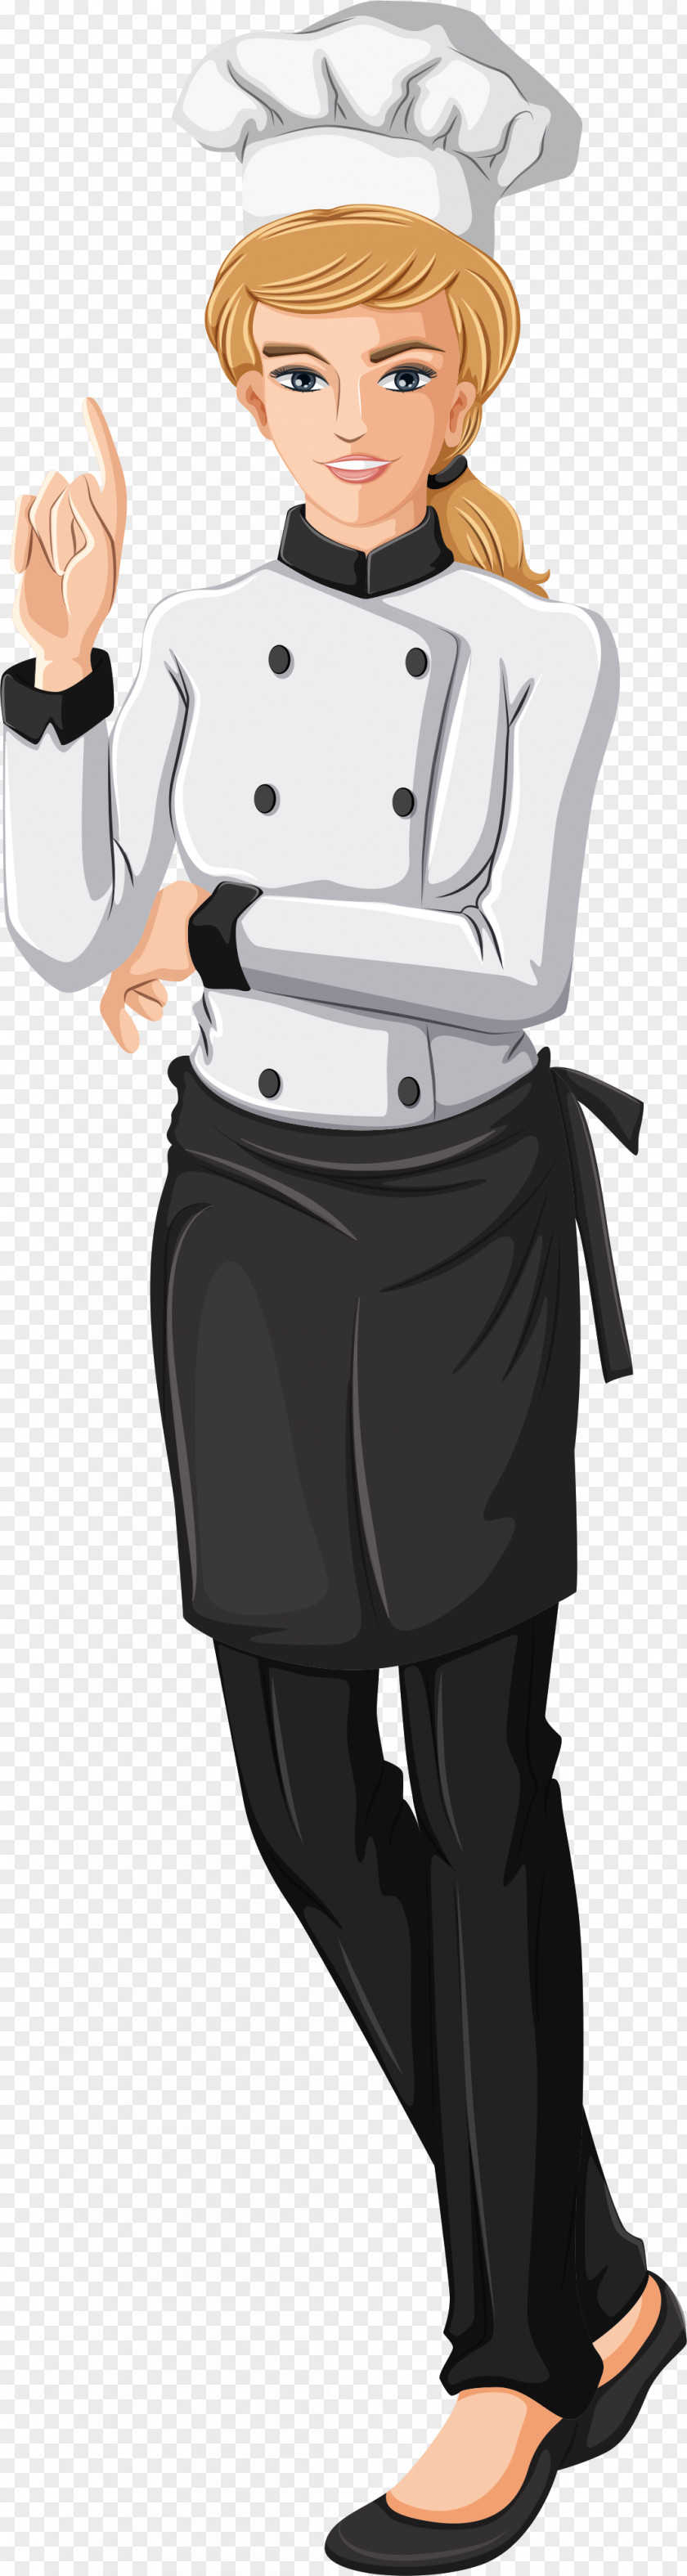 Female Chef Restaurant Cooking PNG